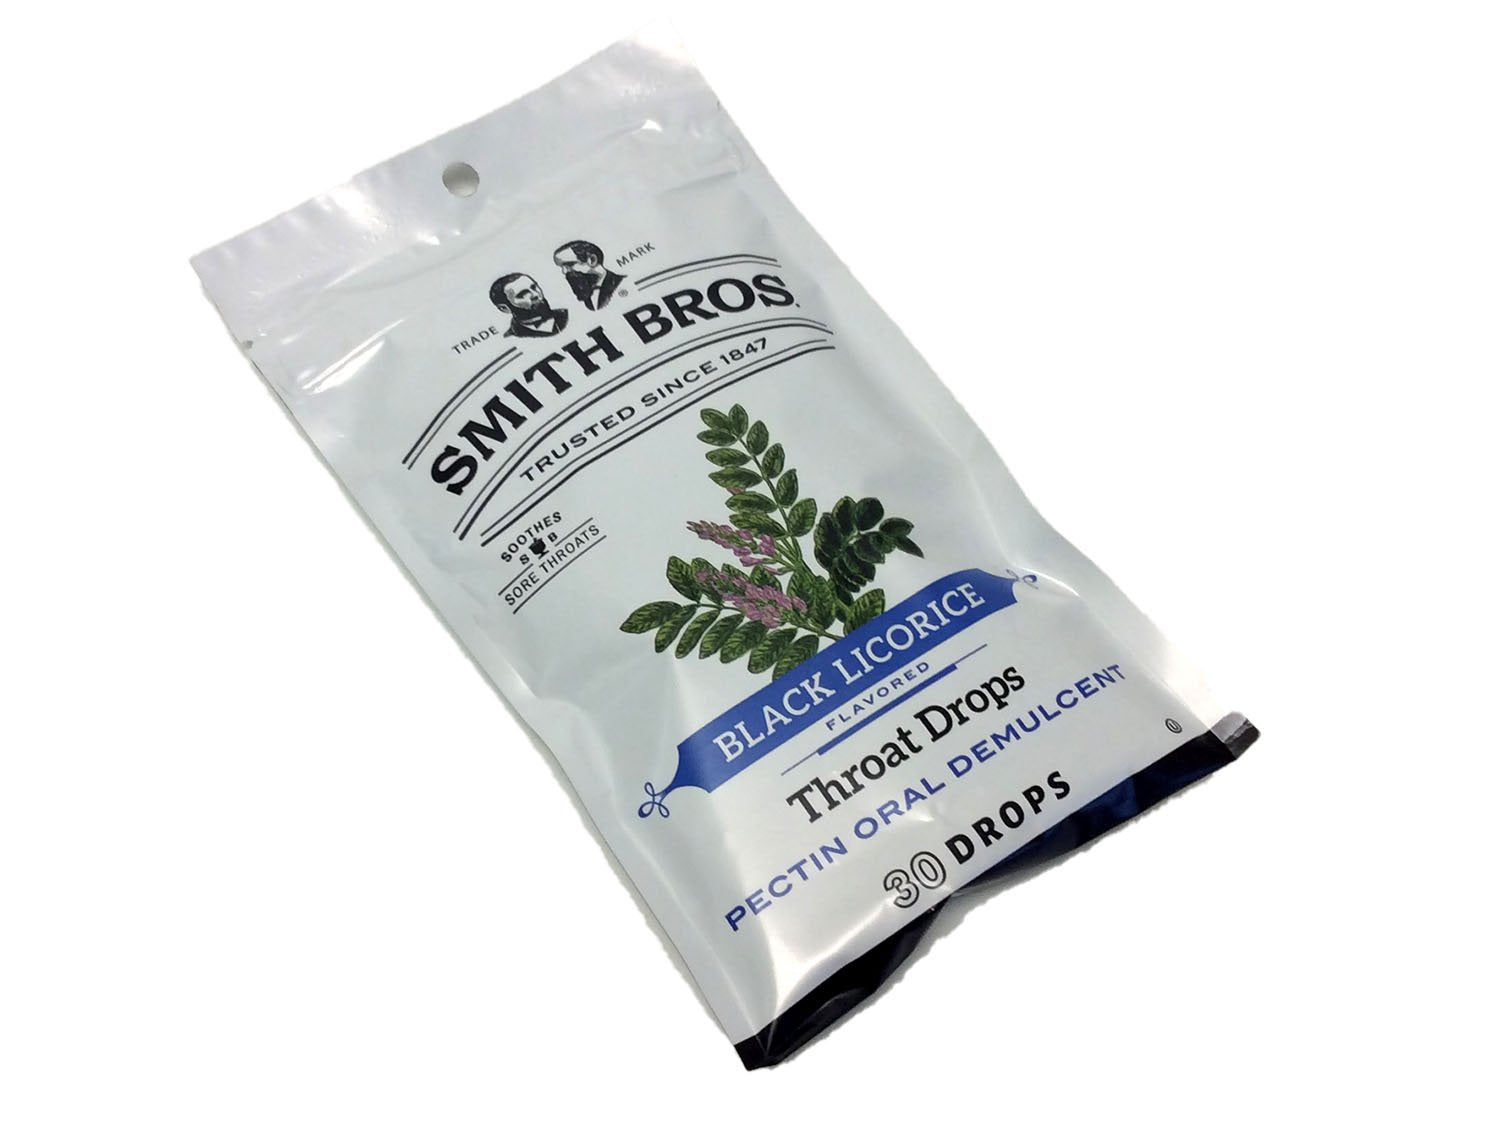 Smith Brothers Cough Drops - Black Licorice - 30 drop bag